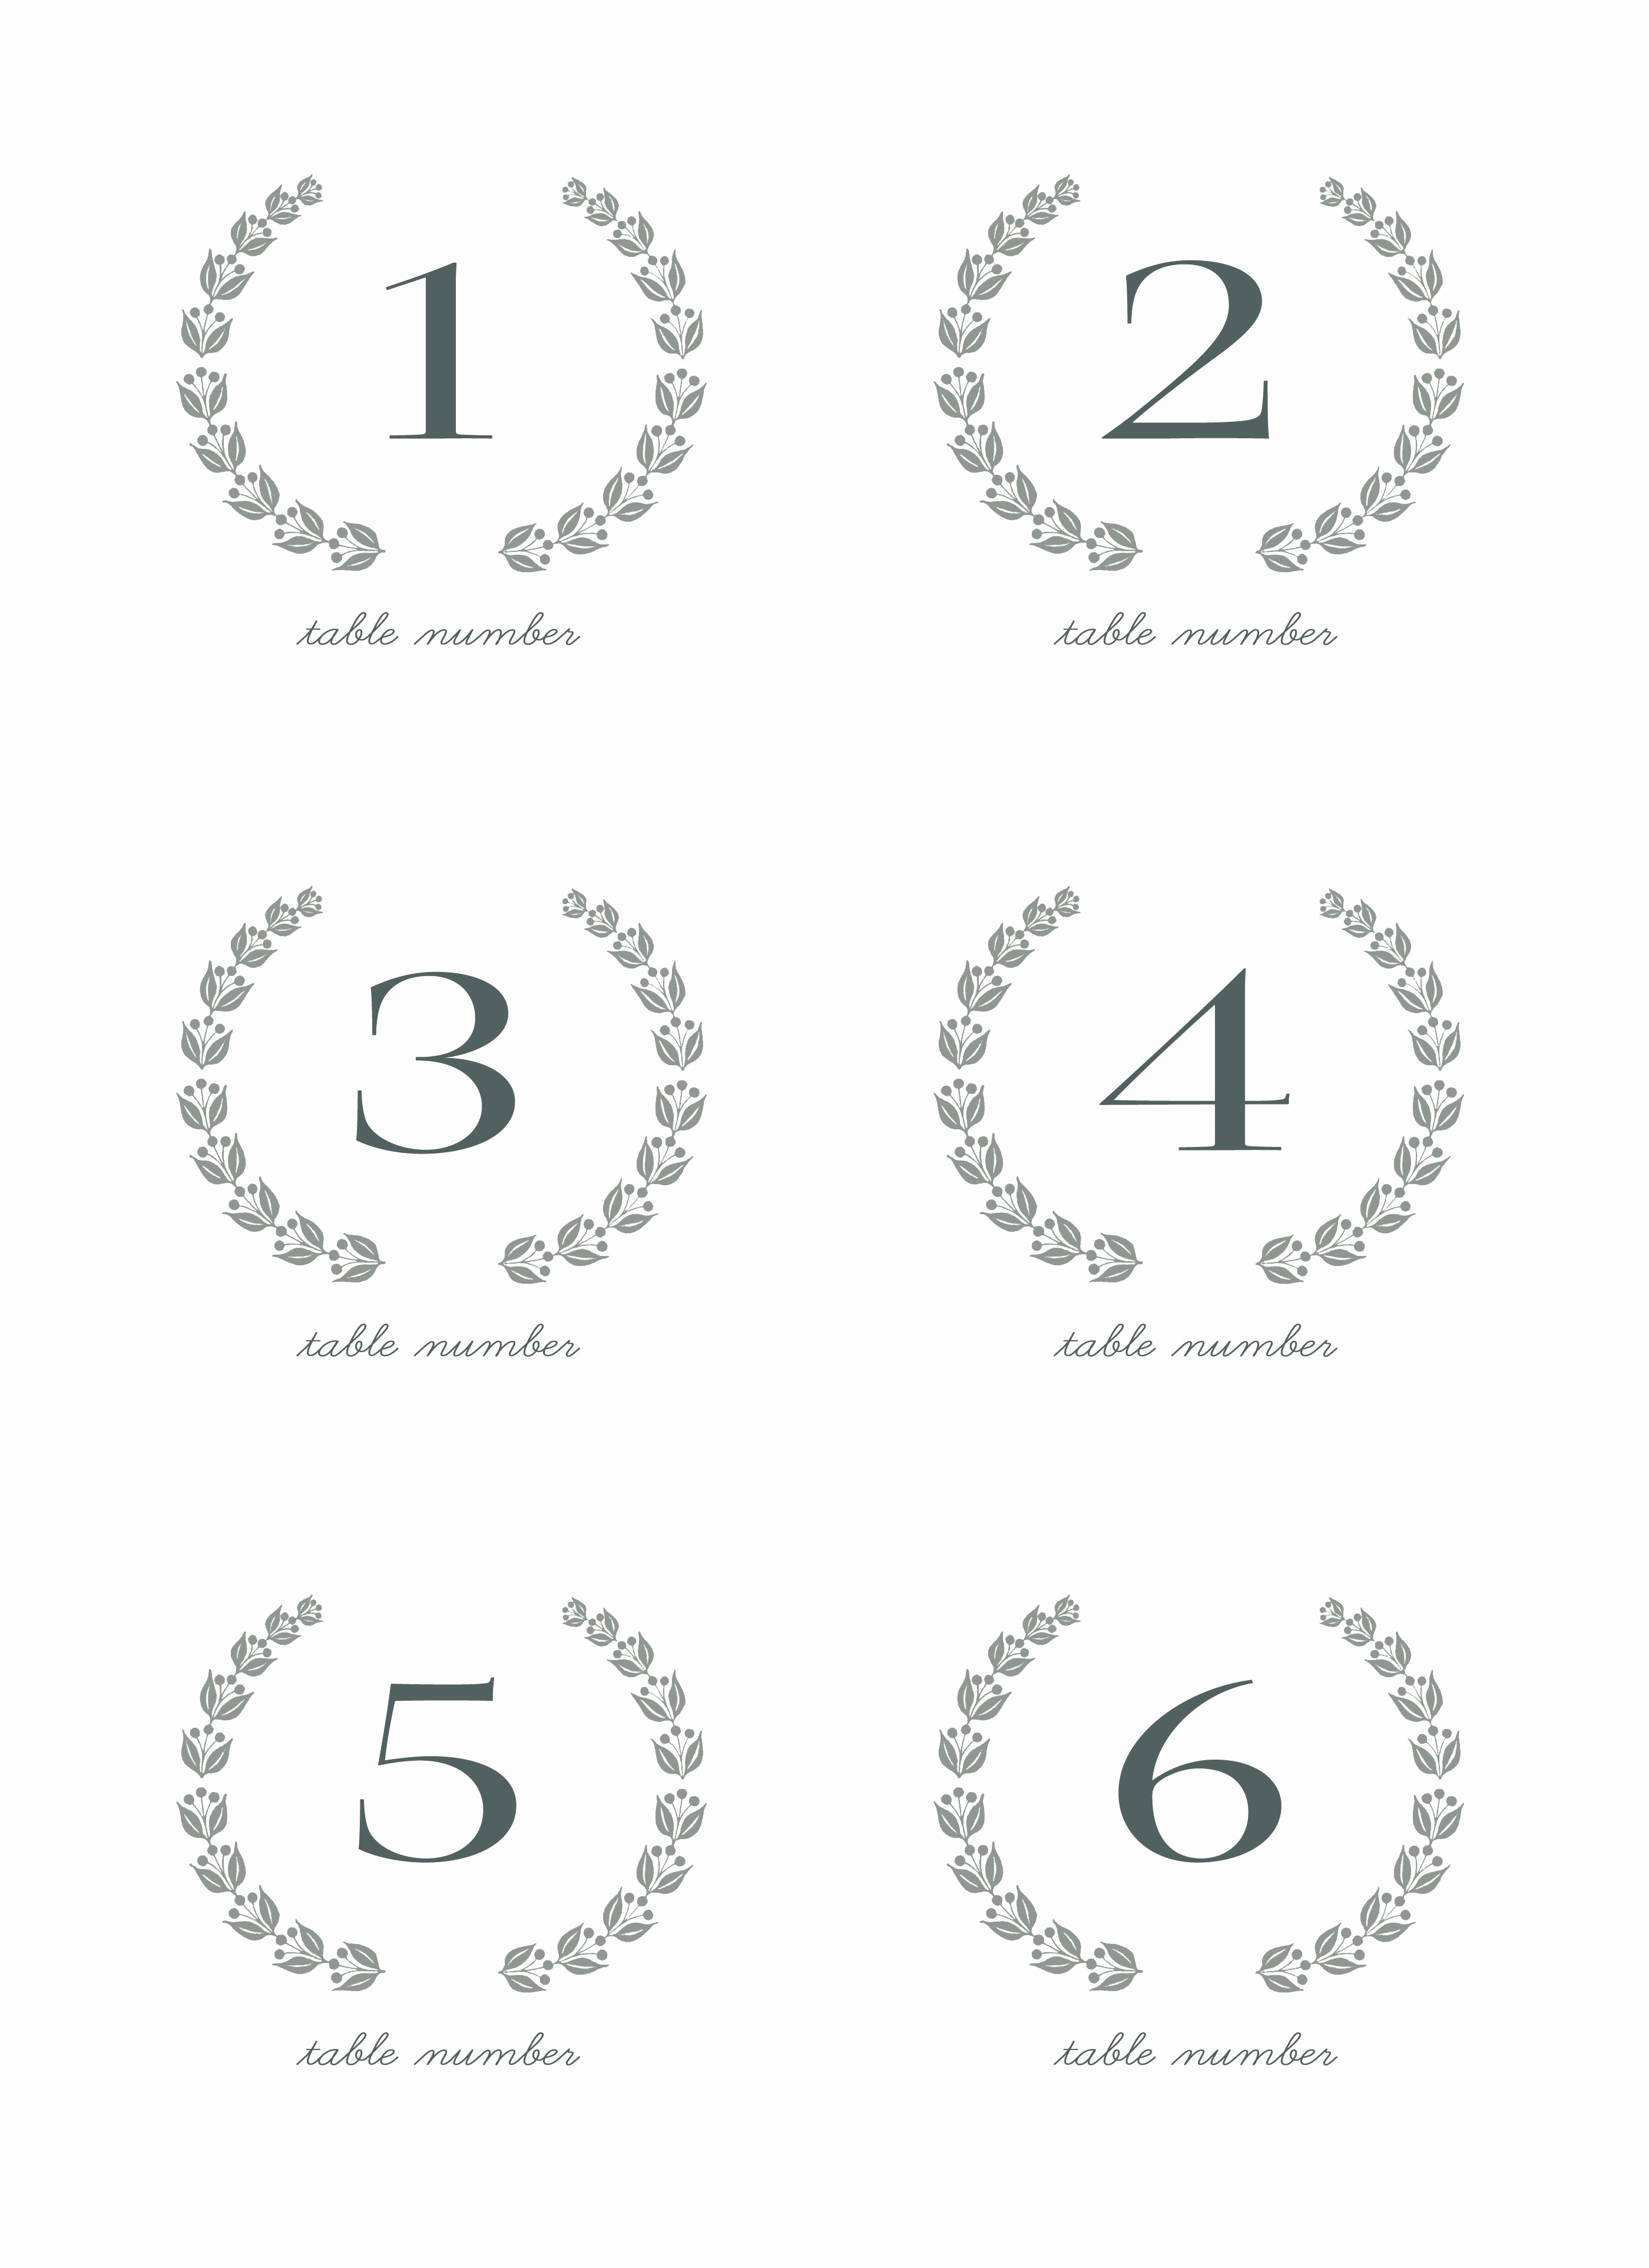 28 Elegant Printable Table Numbers | Kittybabylove - Free Printable Table Numbers 1 30